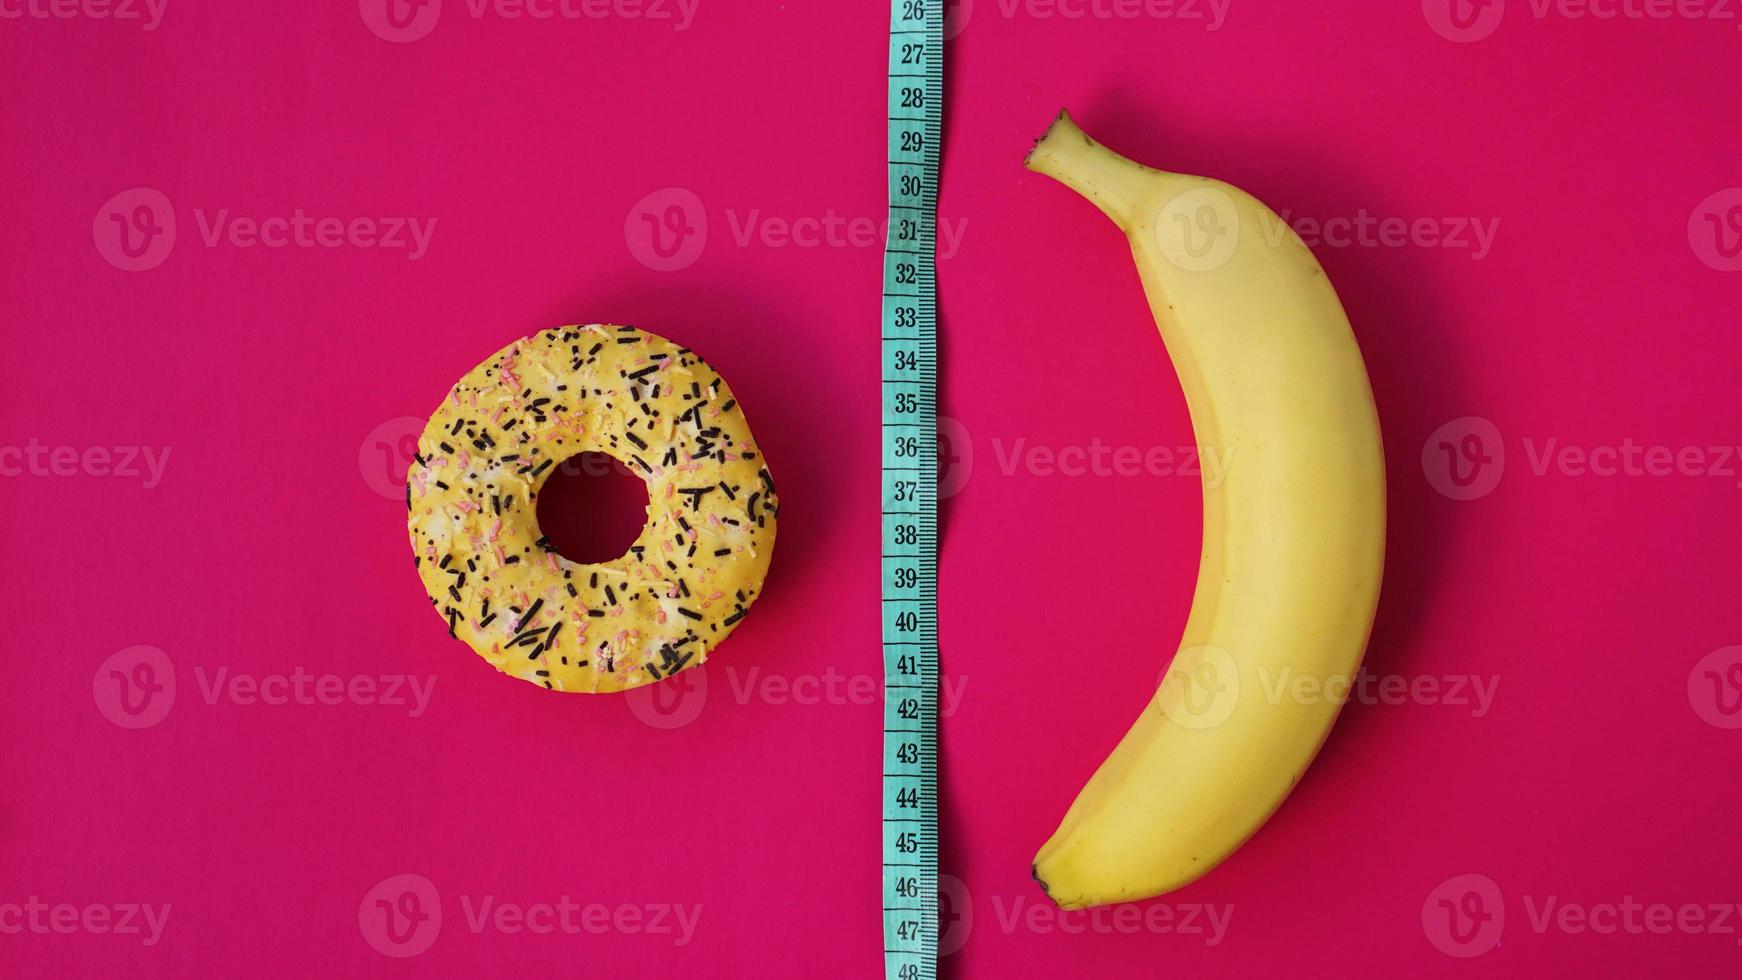 Two types of food, healthy and unhealthy, banana photo